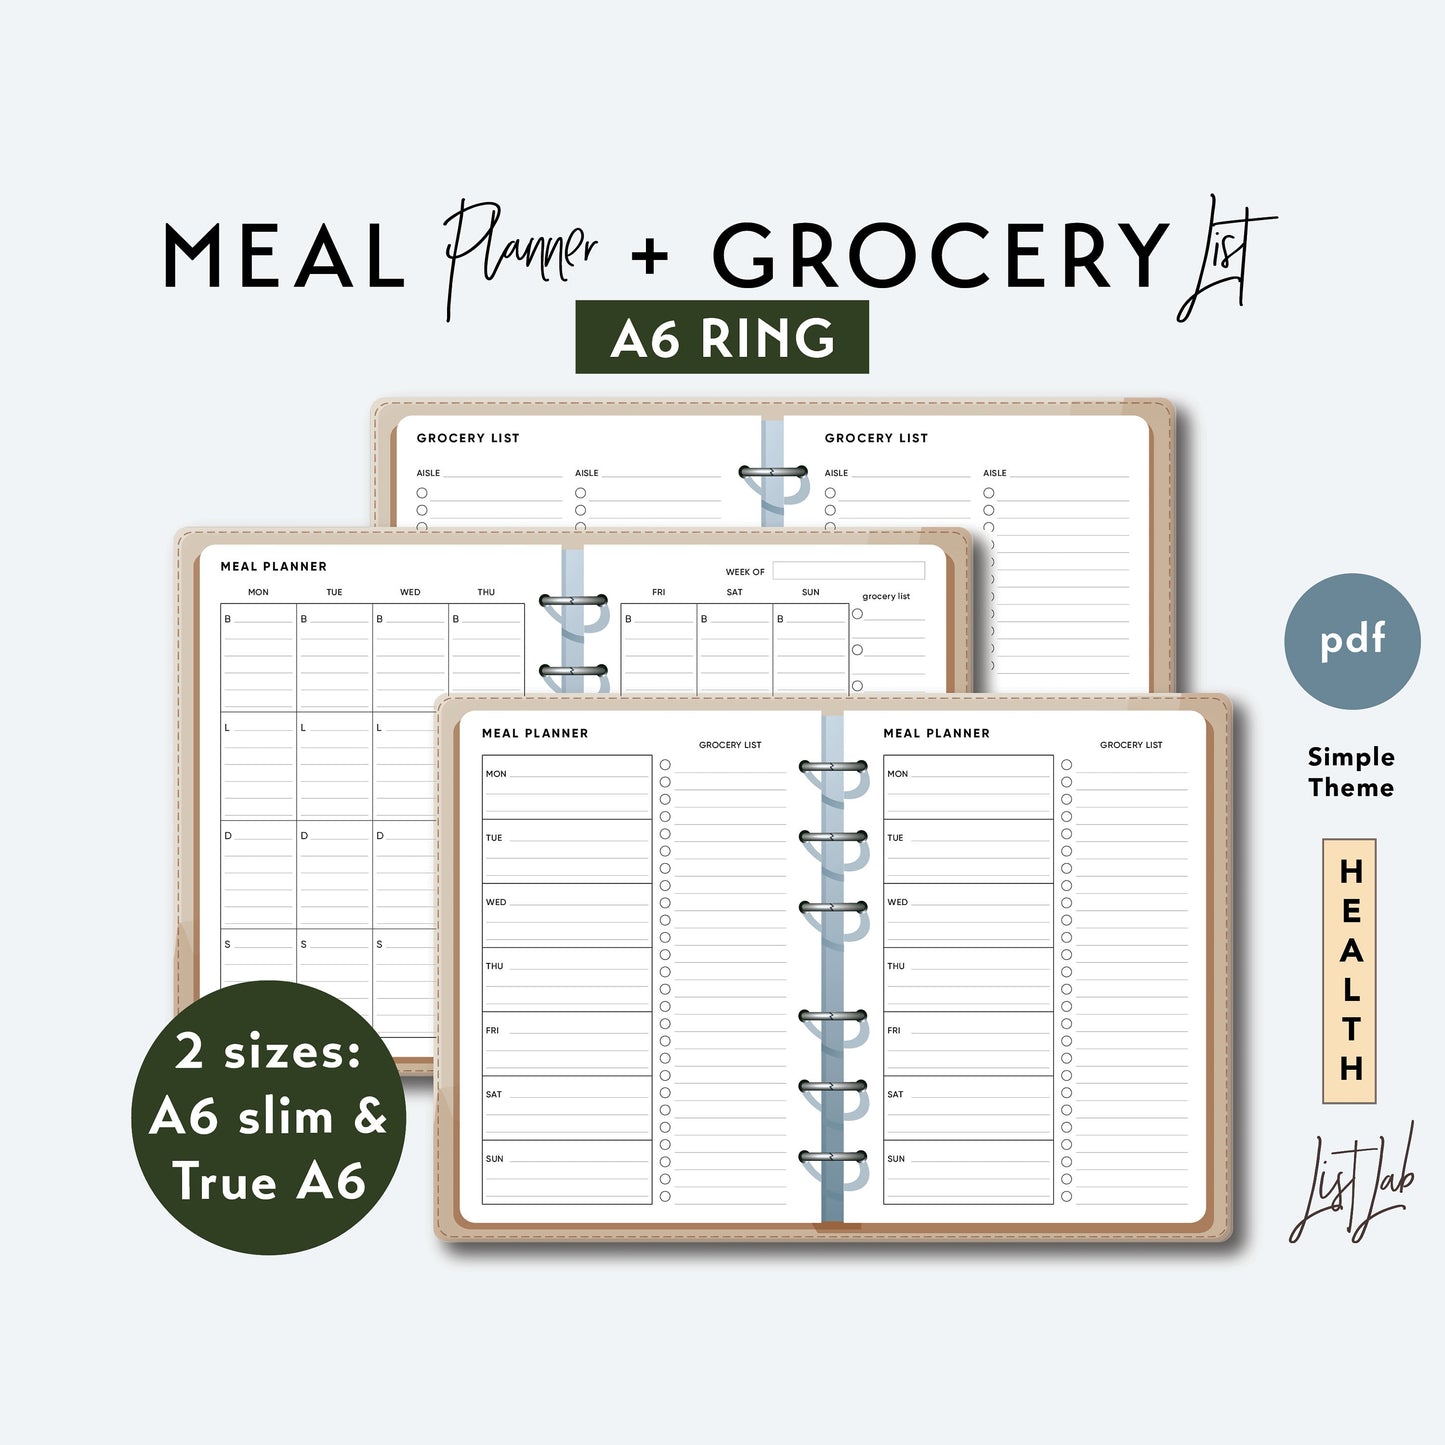 A6 Ring MEAL PLANNER and GROCERY List Printable Set